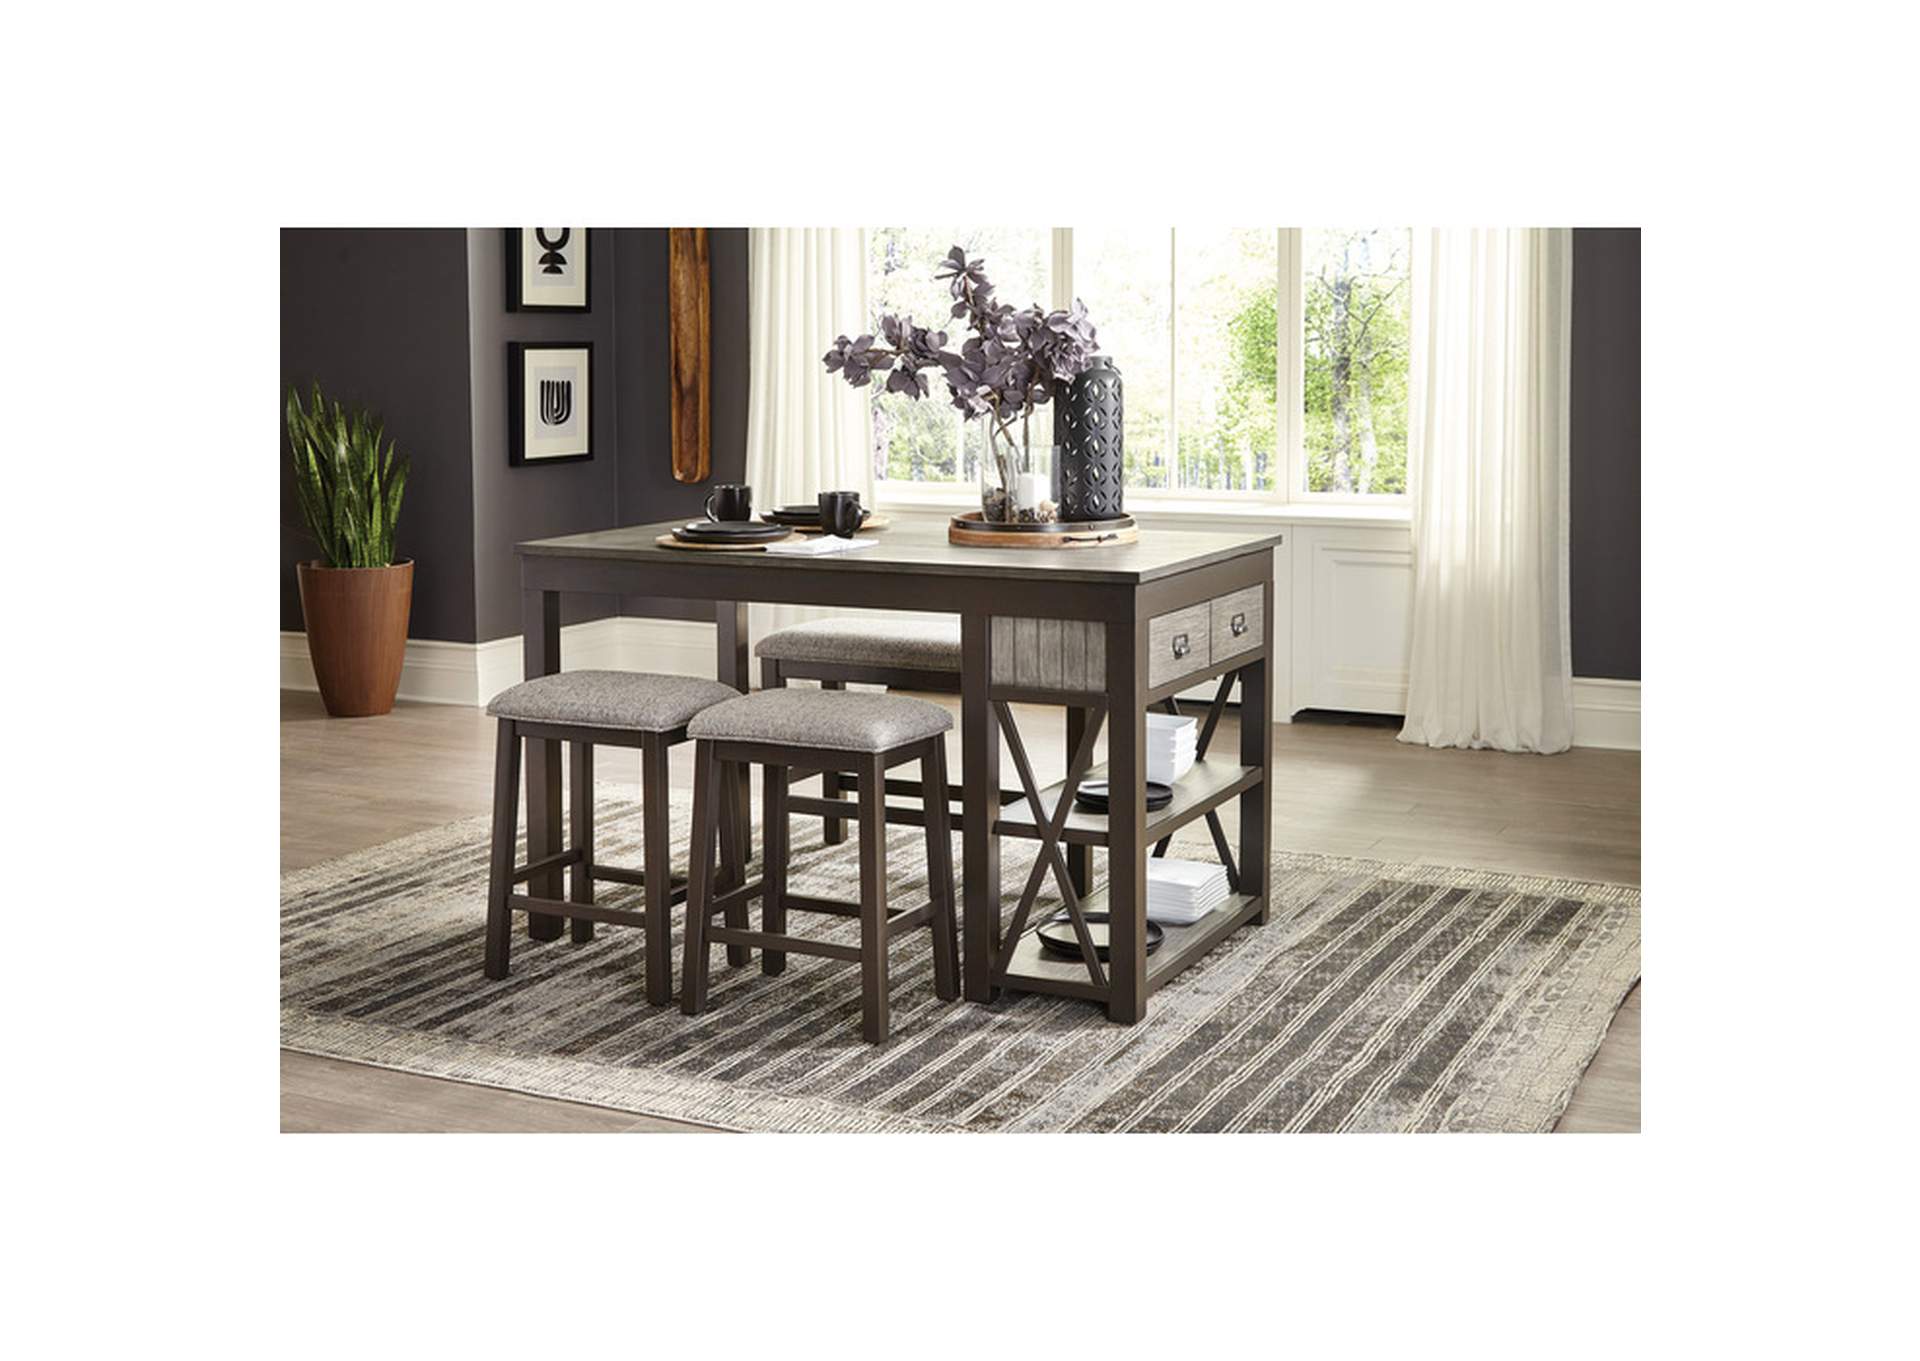 Elias Counter Height Bench,Homelegance